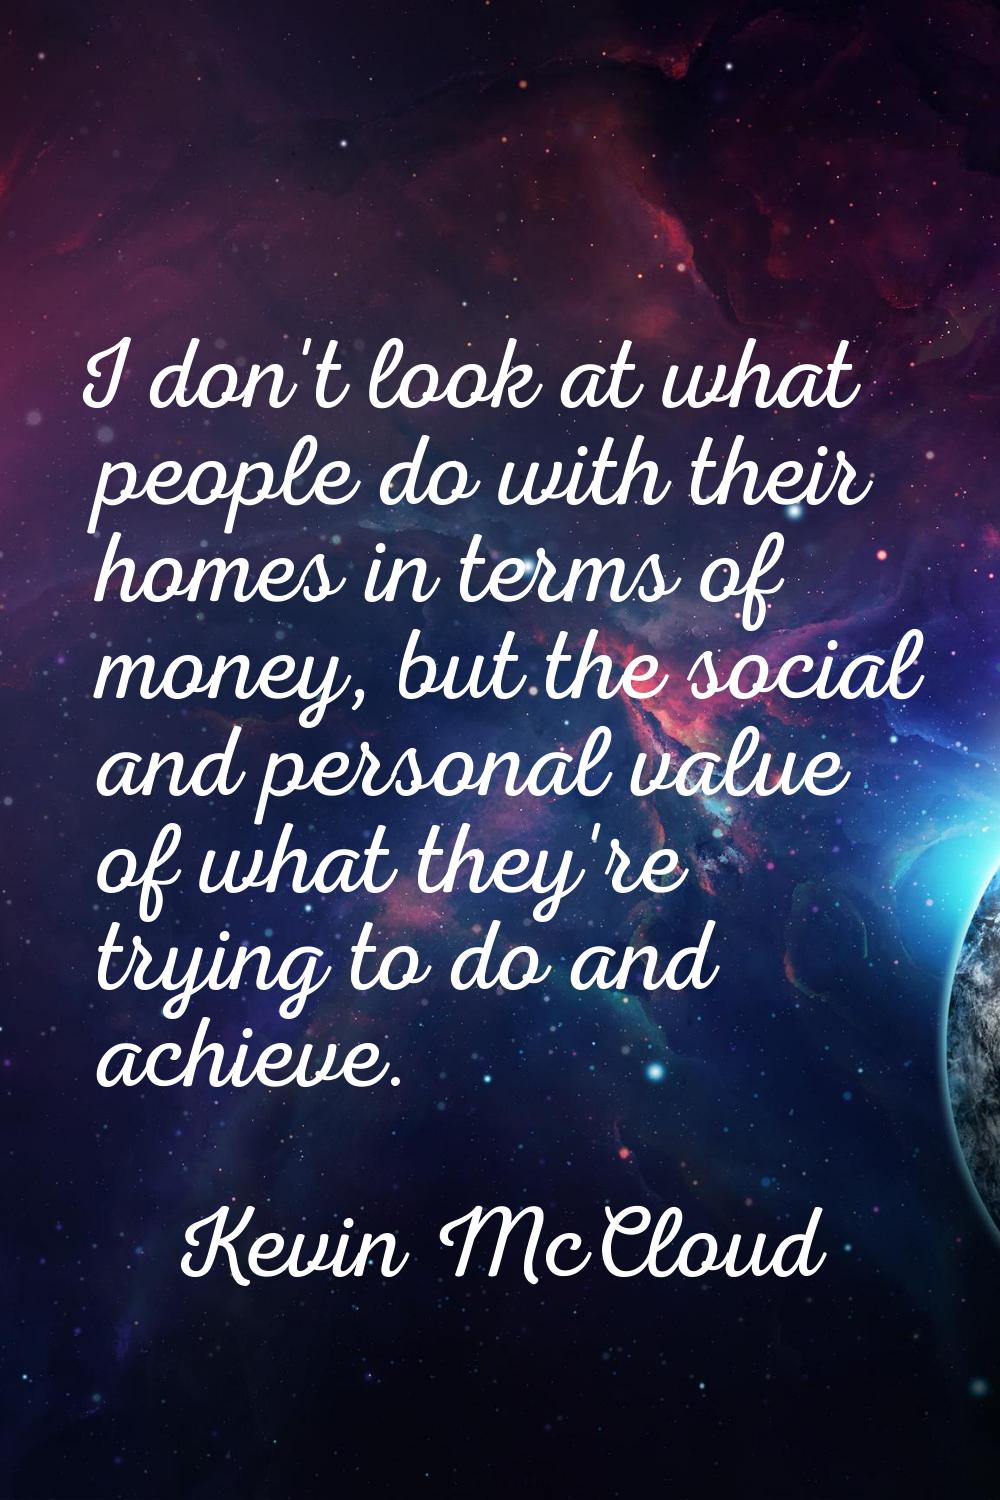 I don't look at what people do with their homes in terms of money, but the social and personal valu